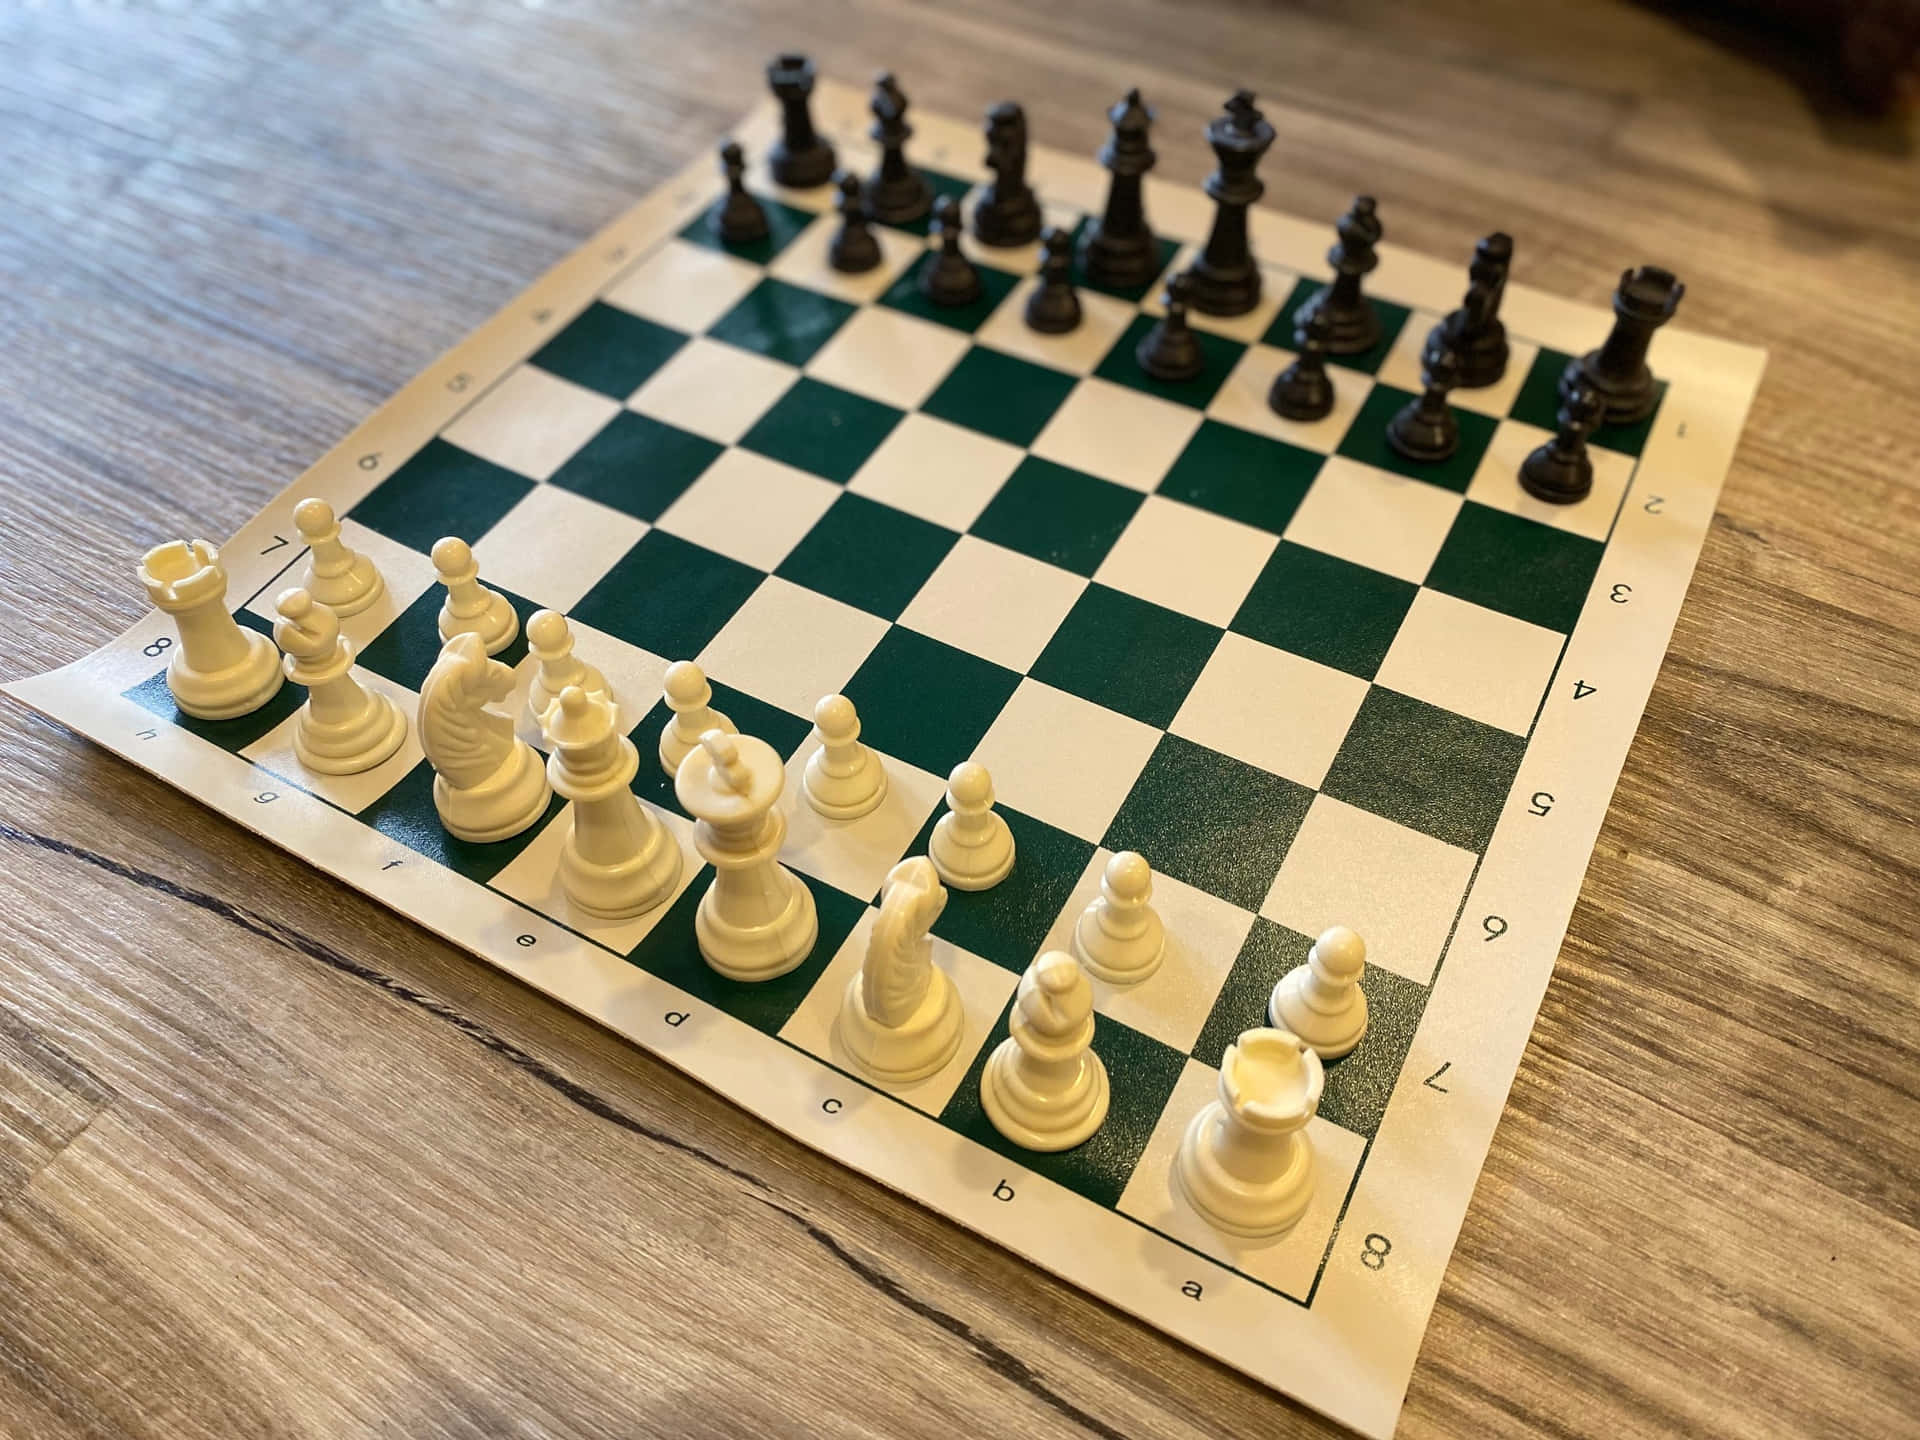 Concentration And Strategy - A Chess Board